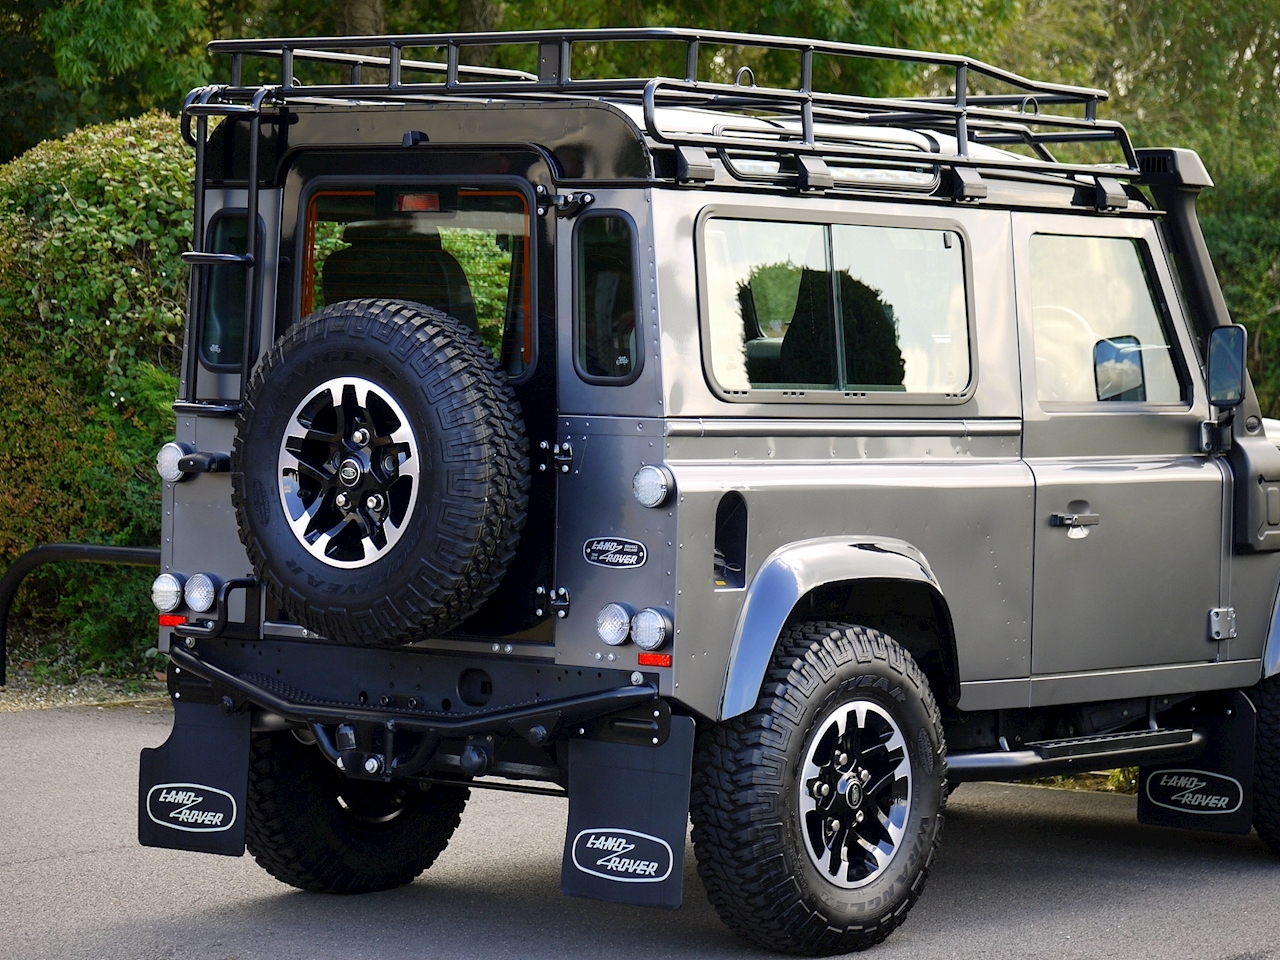 Used Land Rover Defender 90 Adventure Edition 1 of 600